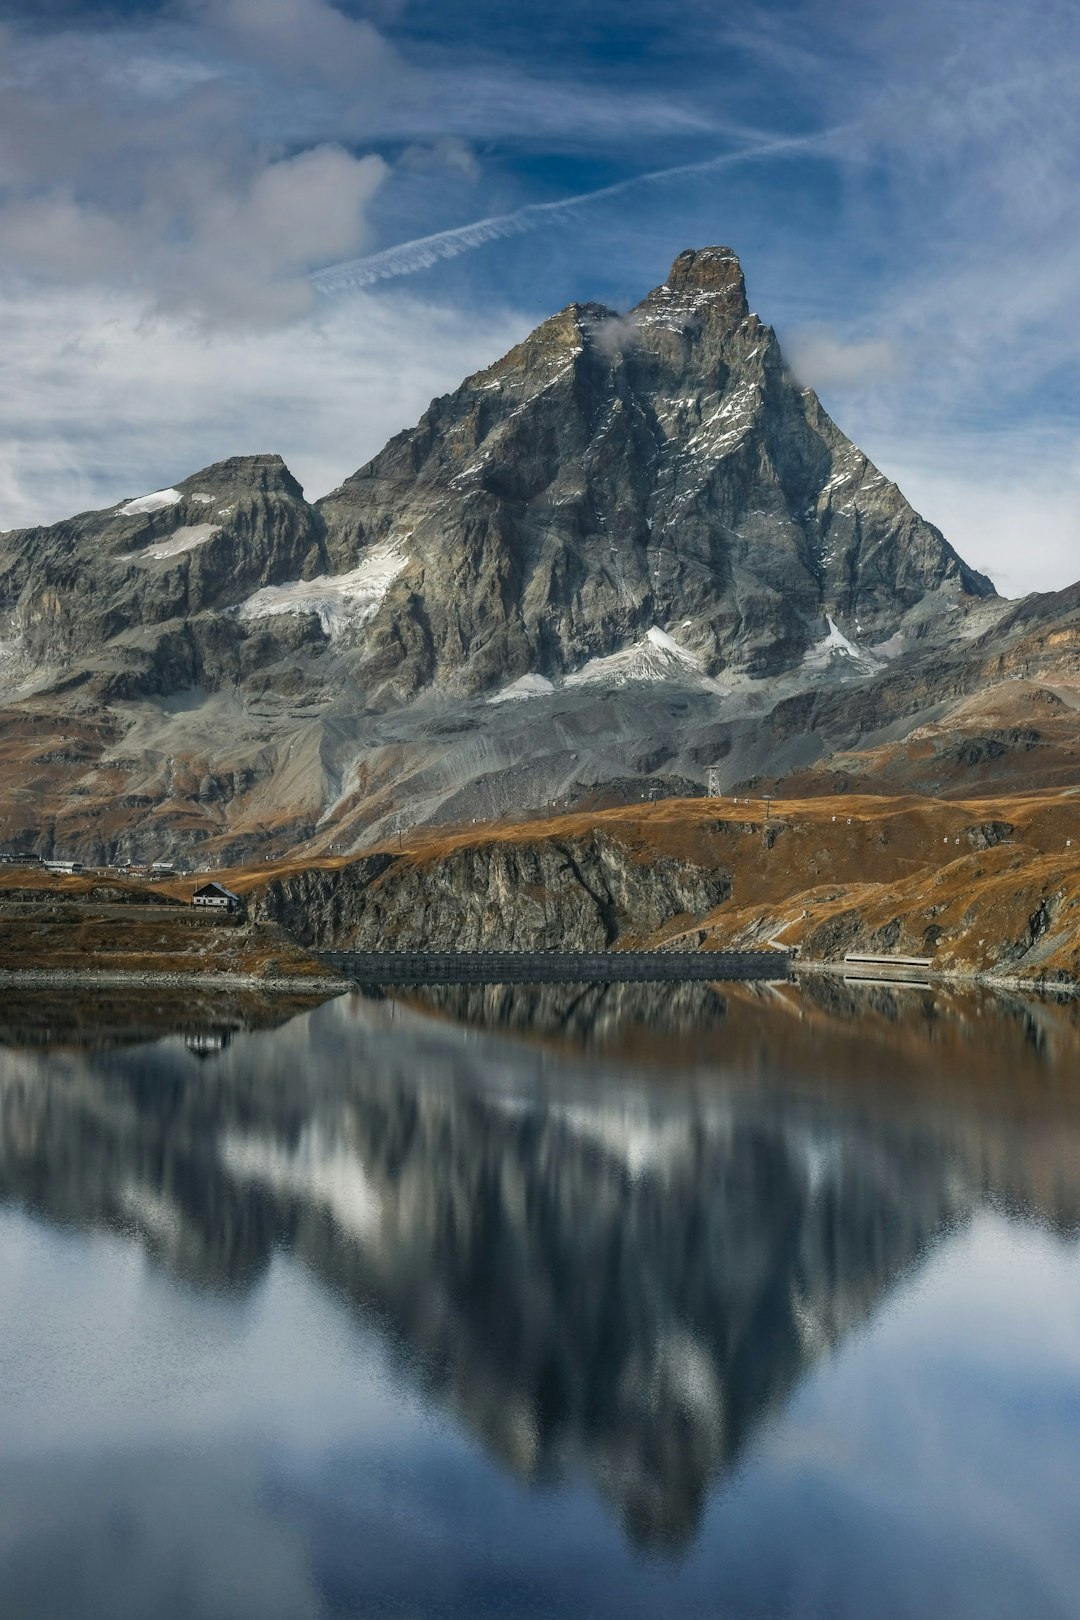 We were on our way to Goillet Lake at 2561 meters above Breuil-Cervinia and took this shot with apparently no wind blowing on the lake. It’s 23 years since I first knew this outstanding piece of rock, italian called Mount Cervino, but all the time I see it in front of me it leaves me stunning and breathless. It’s a deep feeling you never forget.